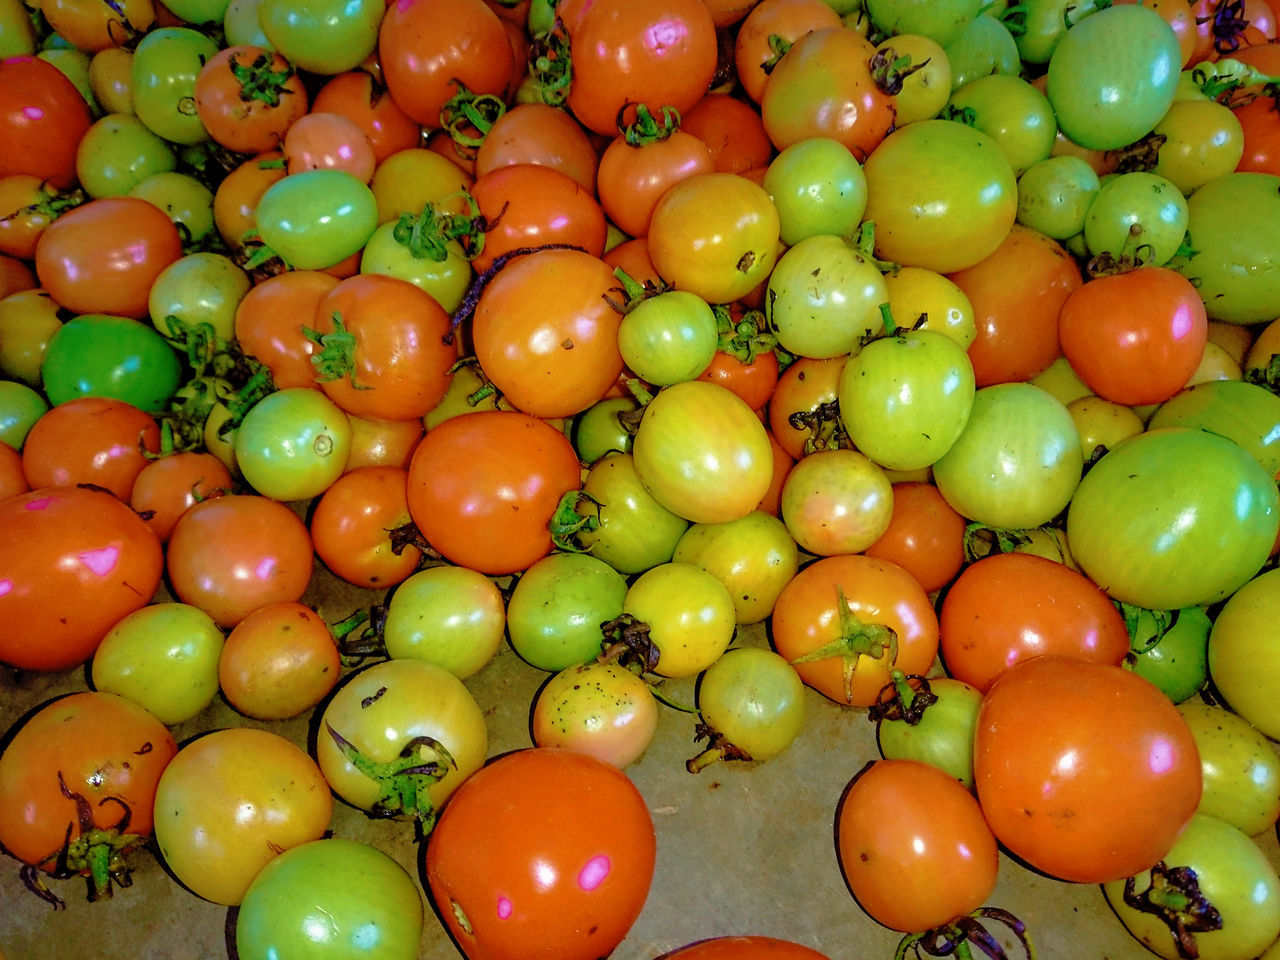 food, food and drink, healthy eating, large group of objects, plant, tomato, produce, freshness, wellbeing, fruit, abundance, vegetable, no people, multi colored, green, full frame, backgrounds, still life, market, high angle view, for sale, indoors, close-up, retail, red